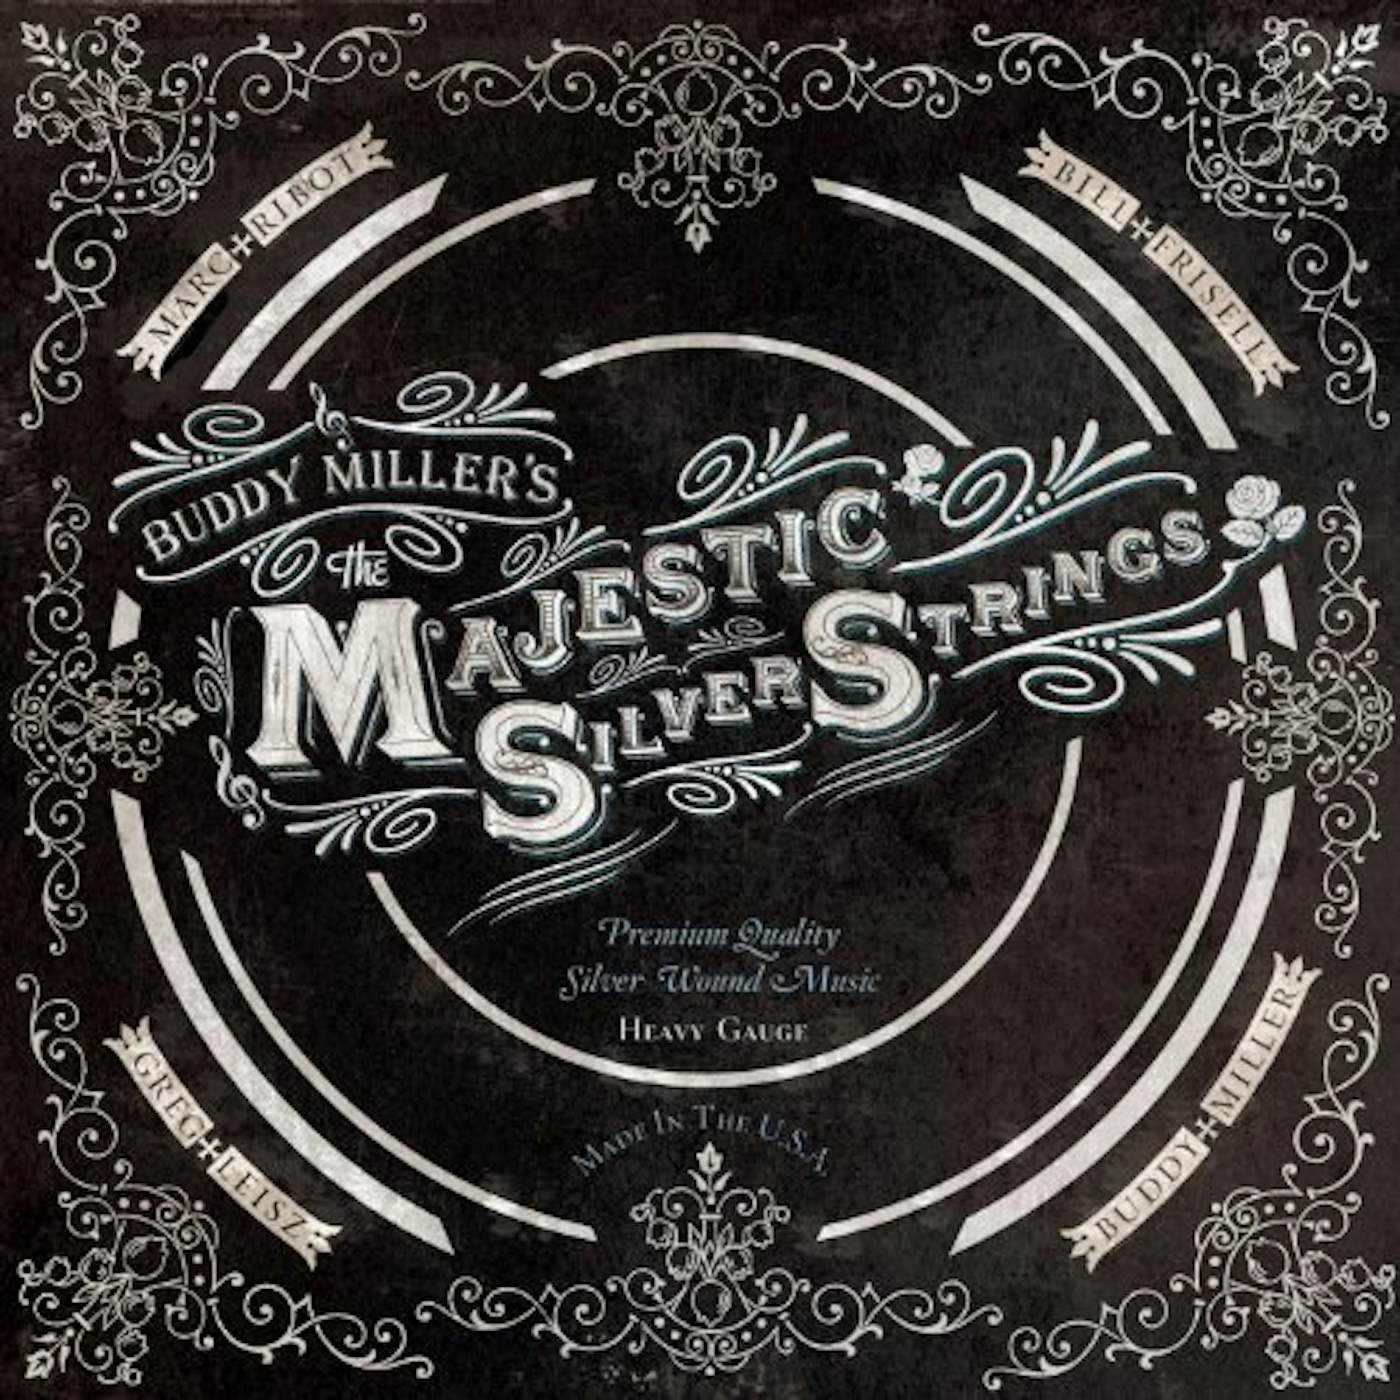 Buddy Miller MAJESTIC SILVER STRINGS Vinyl Record - Limited Edition, 180 Gram Pressing